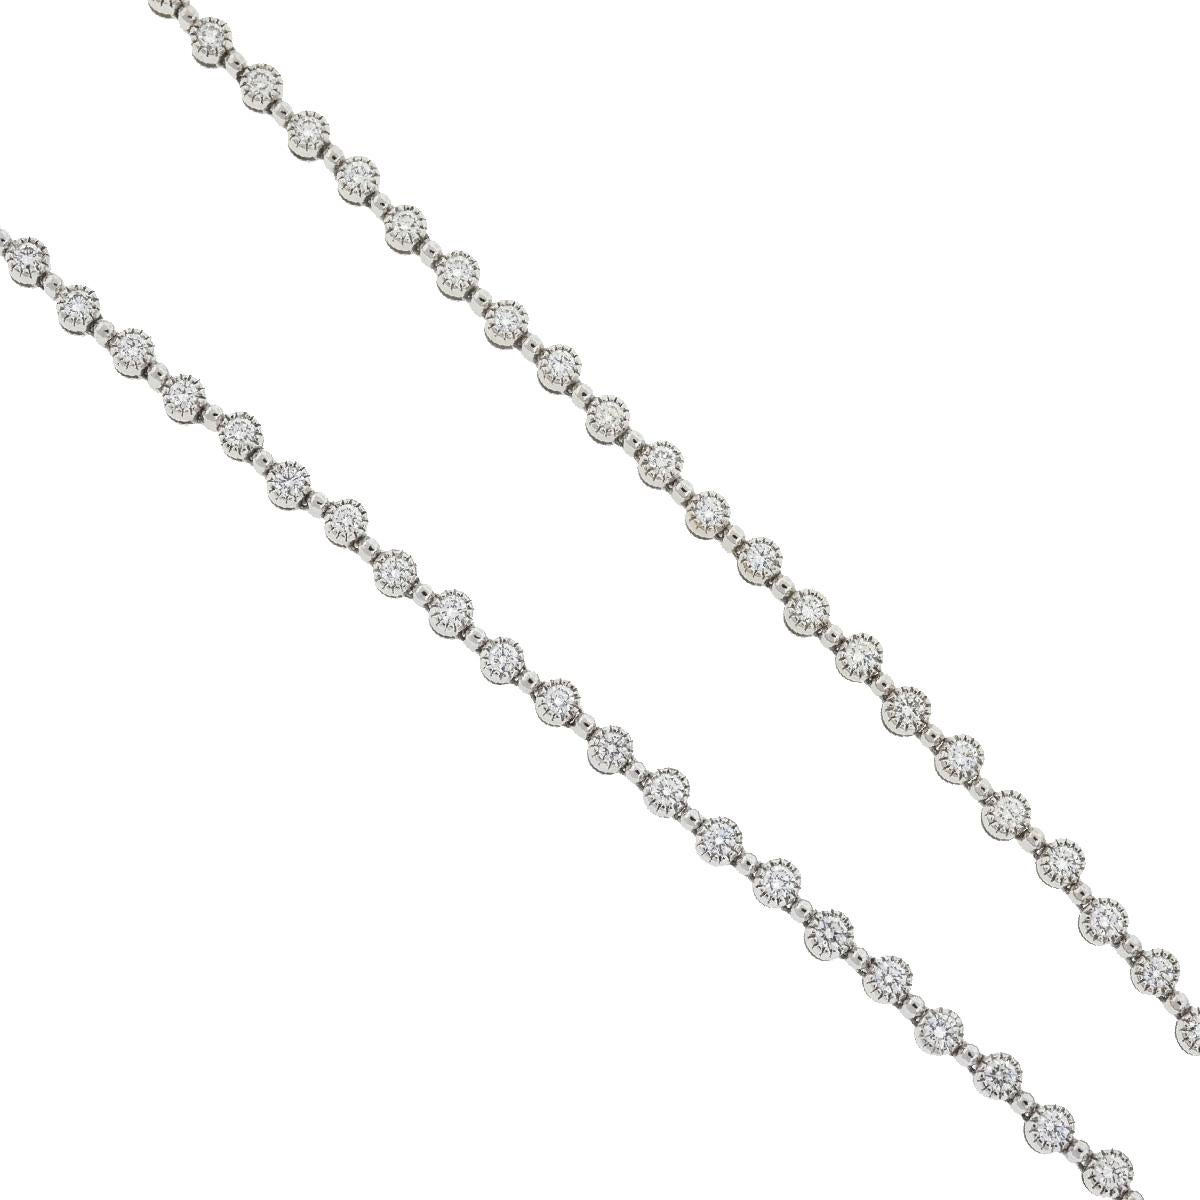 Company-Kwiat
Style-Kwiat Diamond Lariat Necklace 
Metal-18k White Gold
Stone-Diamond Approx - 2.70 Cts TW
Chain Length -14.5